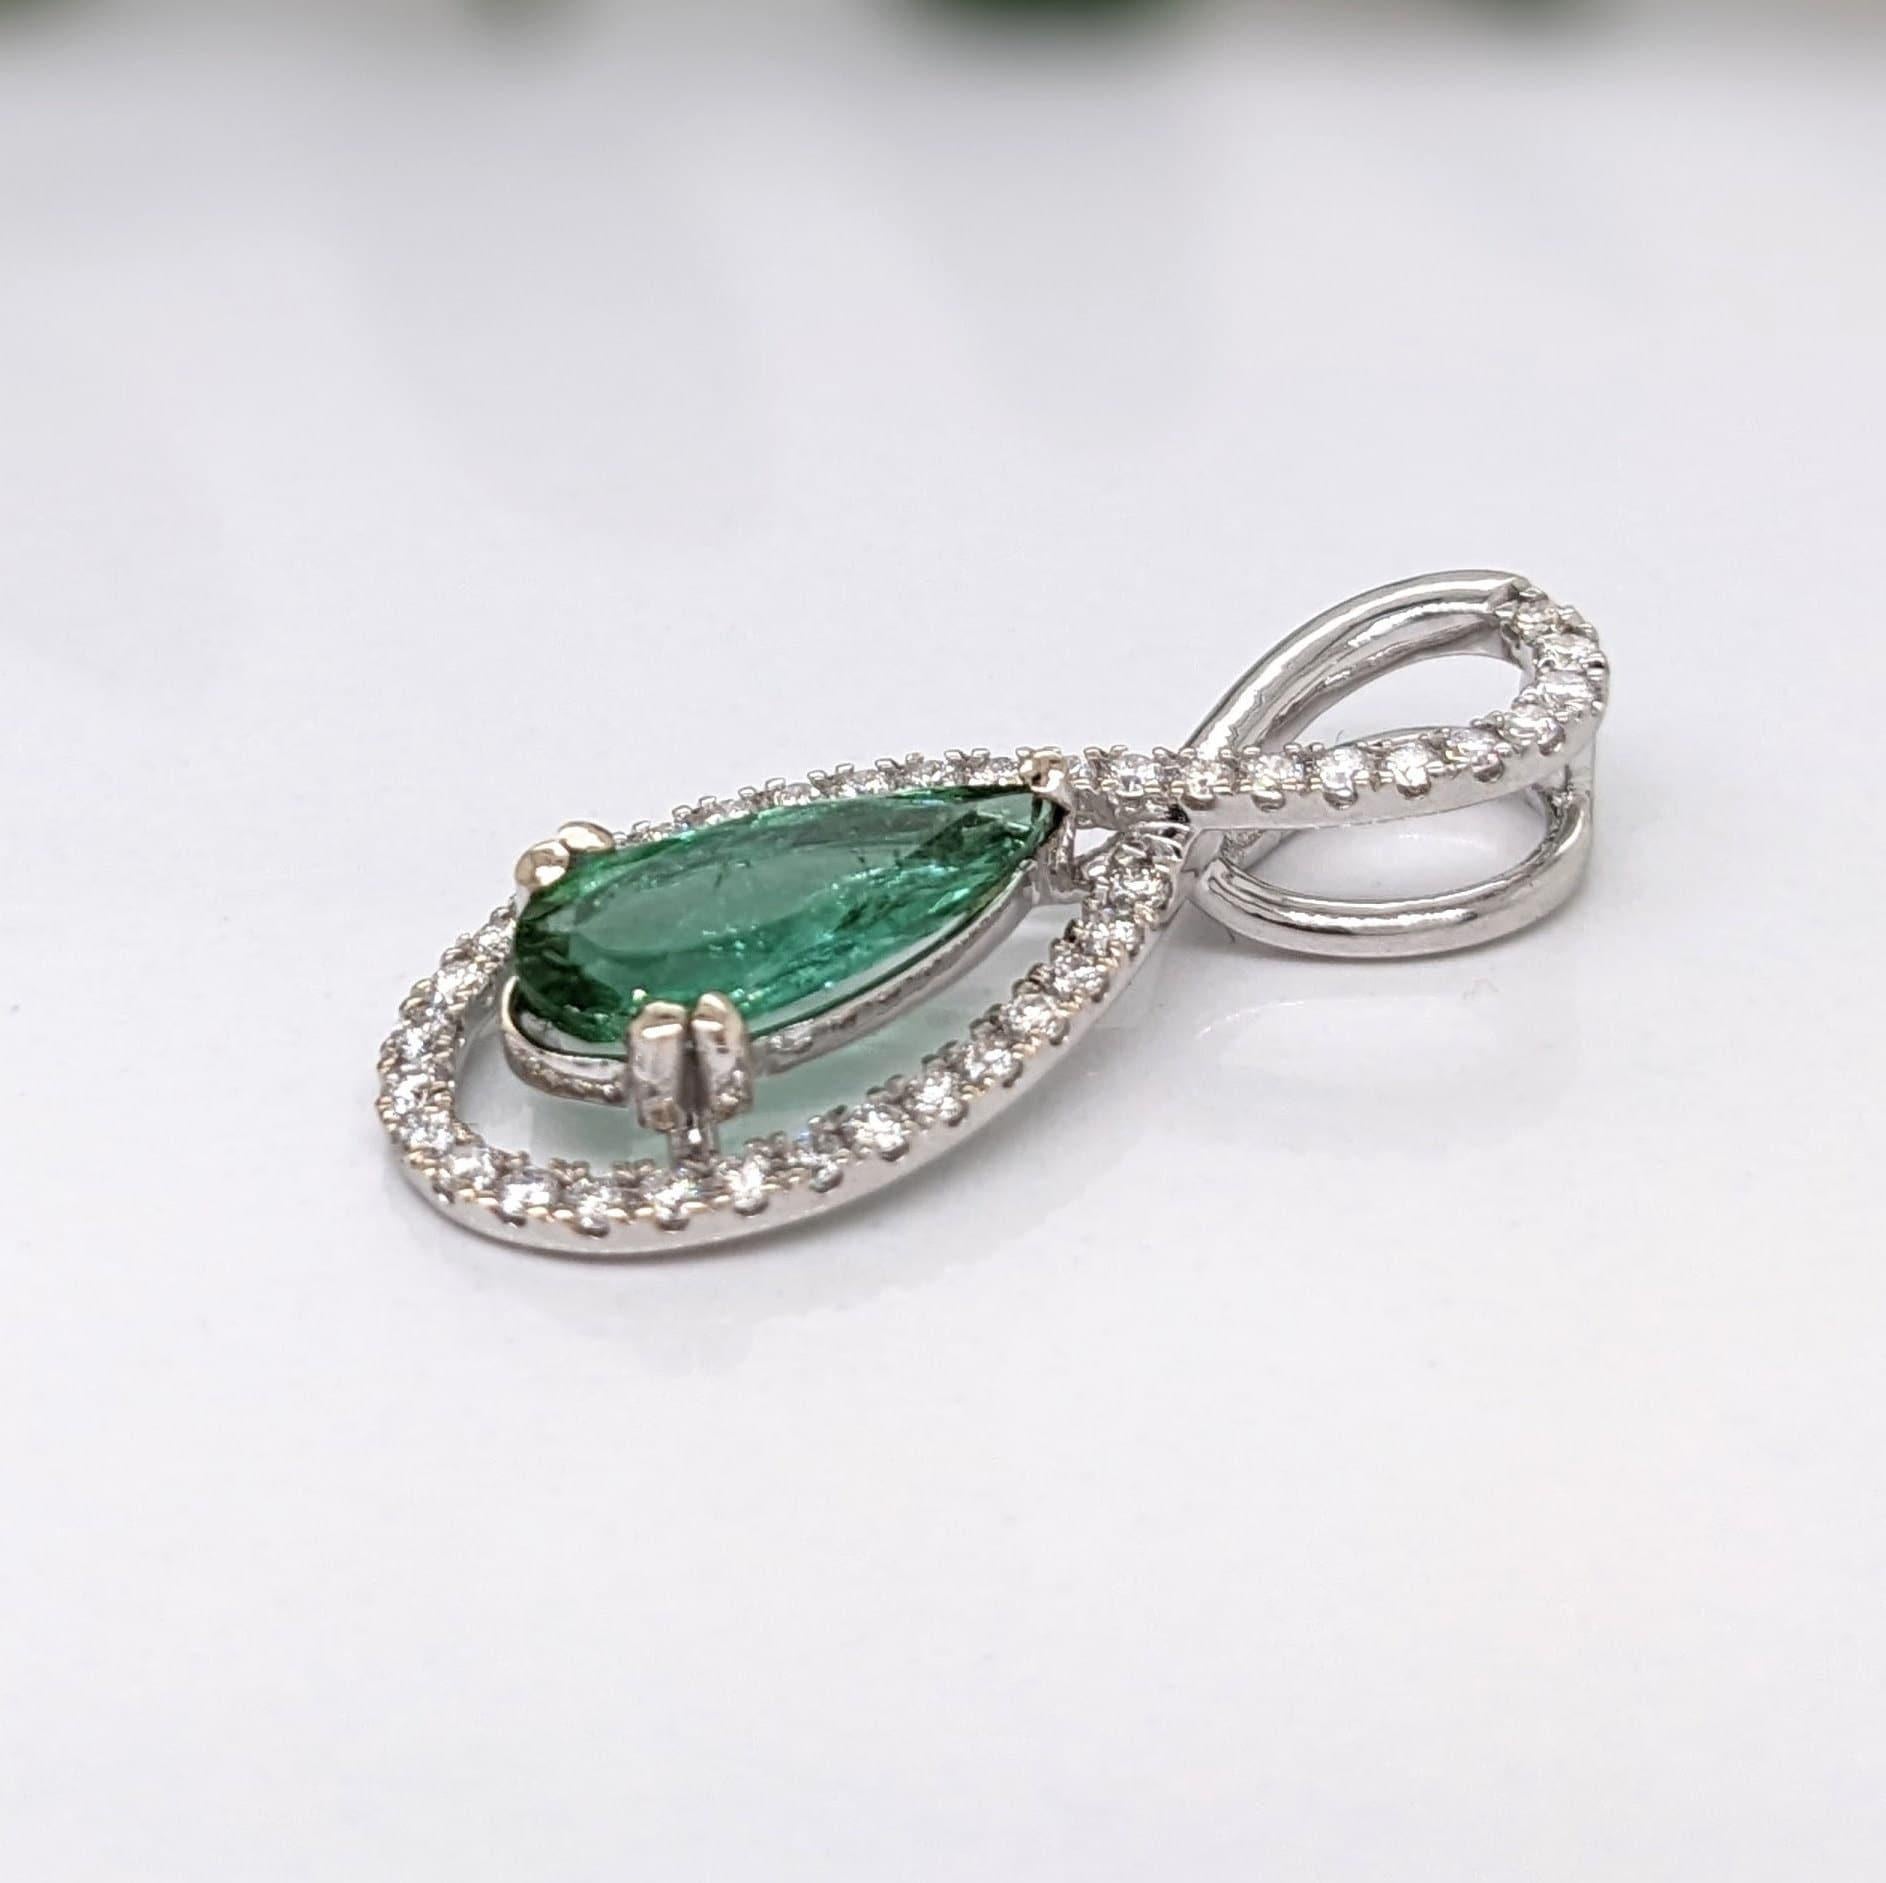 Stunning green tourmaline Pendant in 14K white gold set with a beautiful diamond halo. Perfect for May birthstone and any special occasion! 

Specifications

Item Type: Pendant 
Center Stone: Tourmaline
Treatment: Heated
Weight: 1.09ct 
Head size: